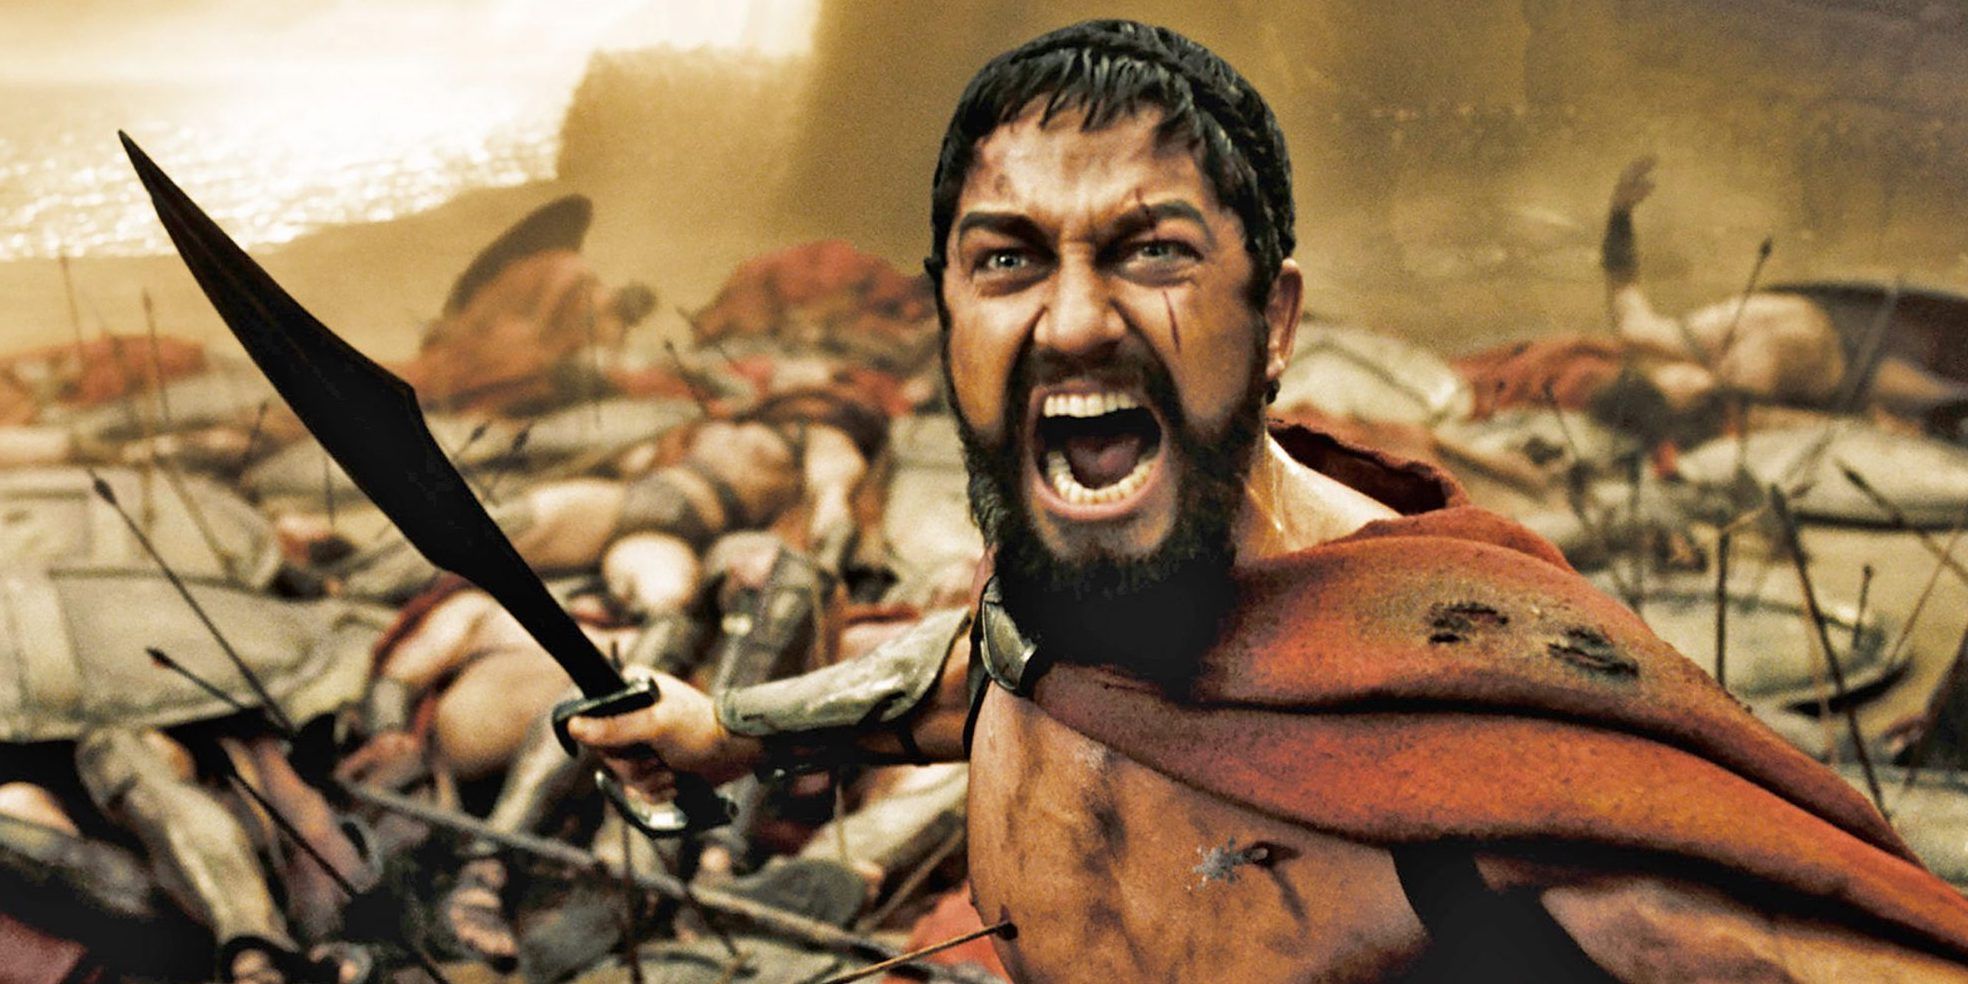 Leonidas wielding a sword and roaring in rage in 300 (2006)